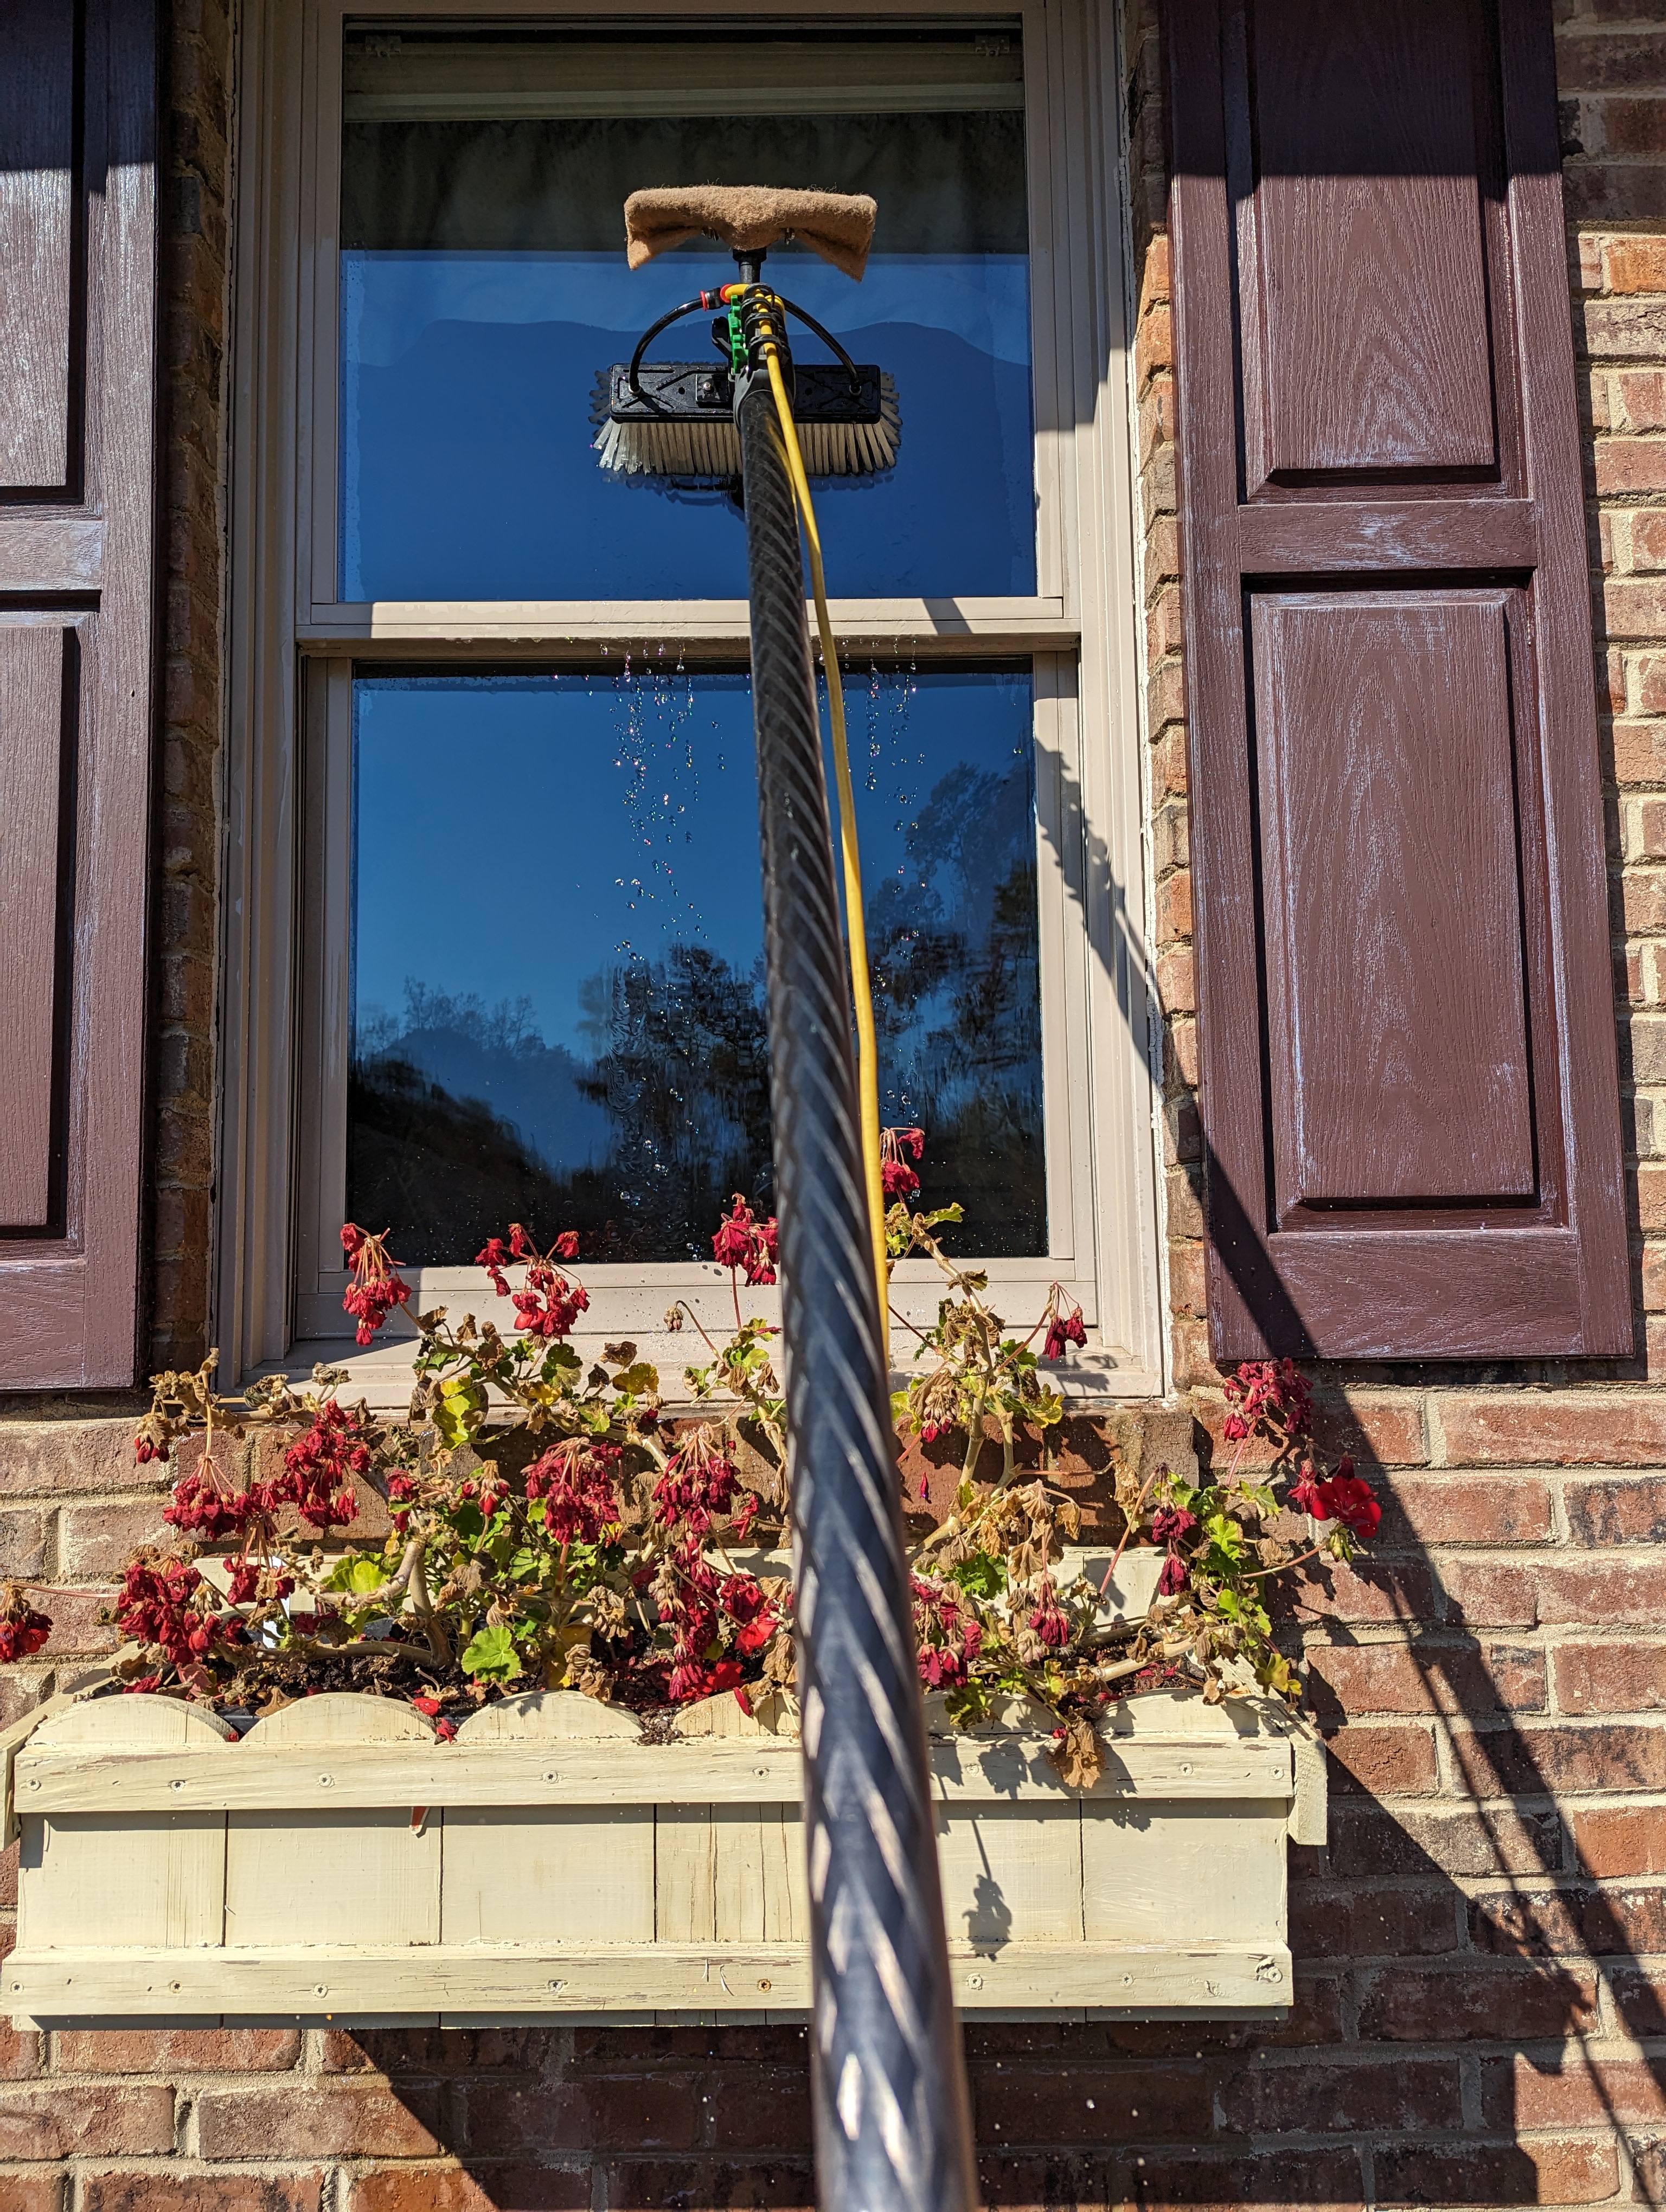 Remarkable Quality Window Cleaning Service in Mint Hill, NC